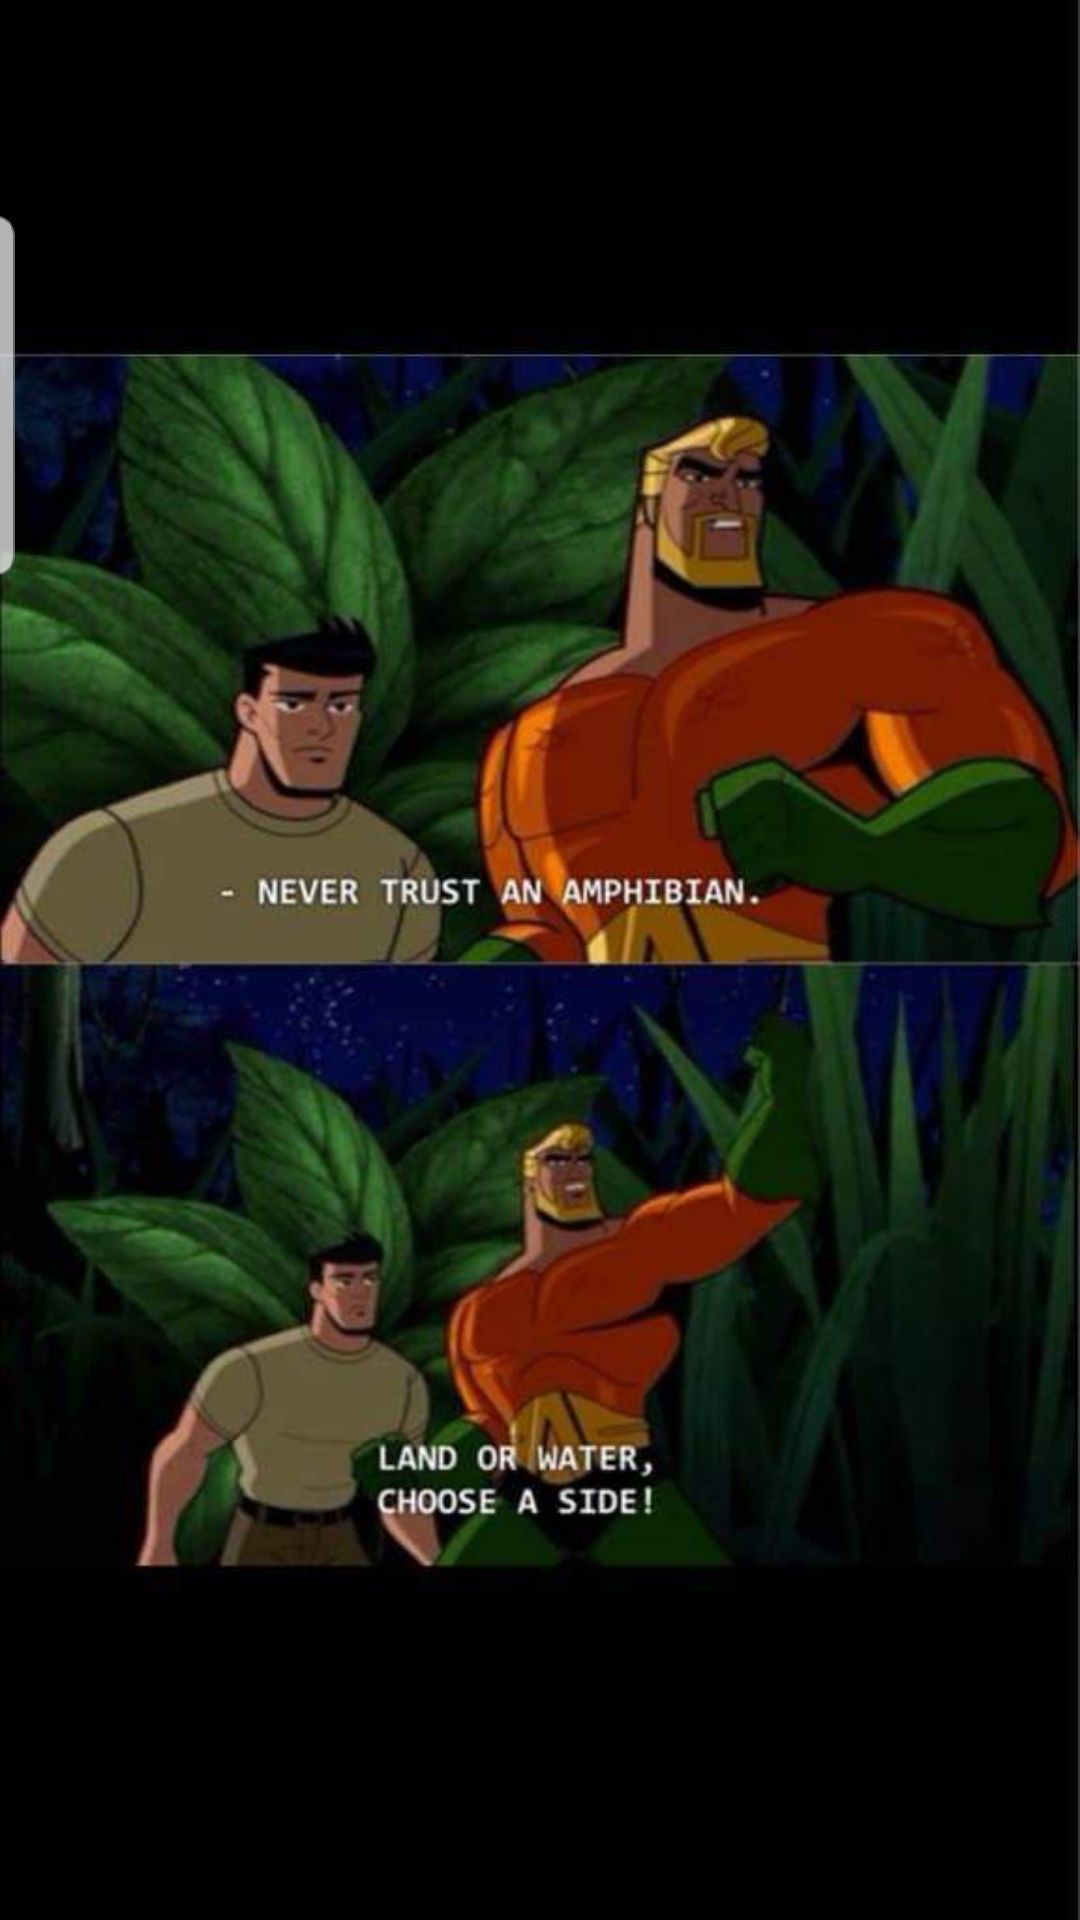 Aquaman doesn't trust frogs